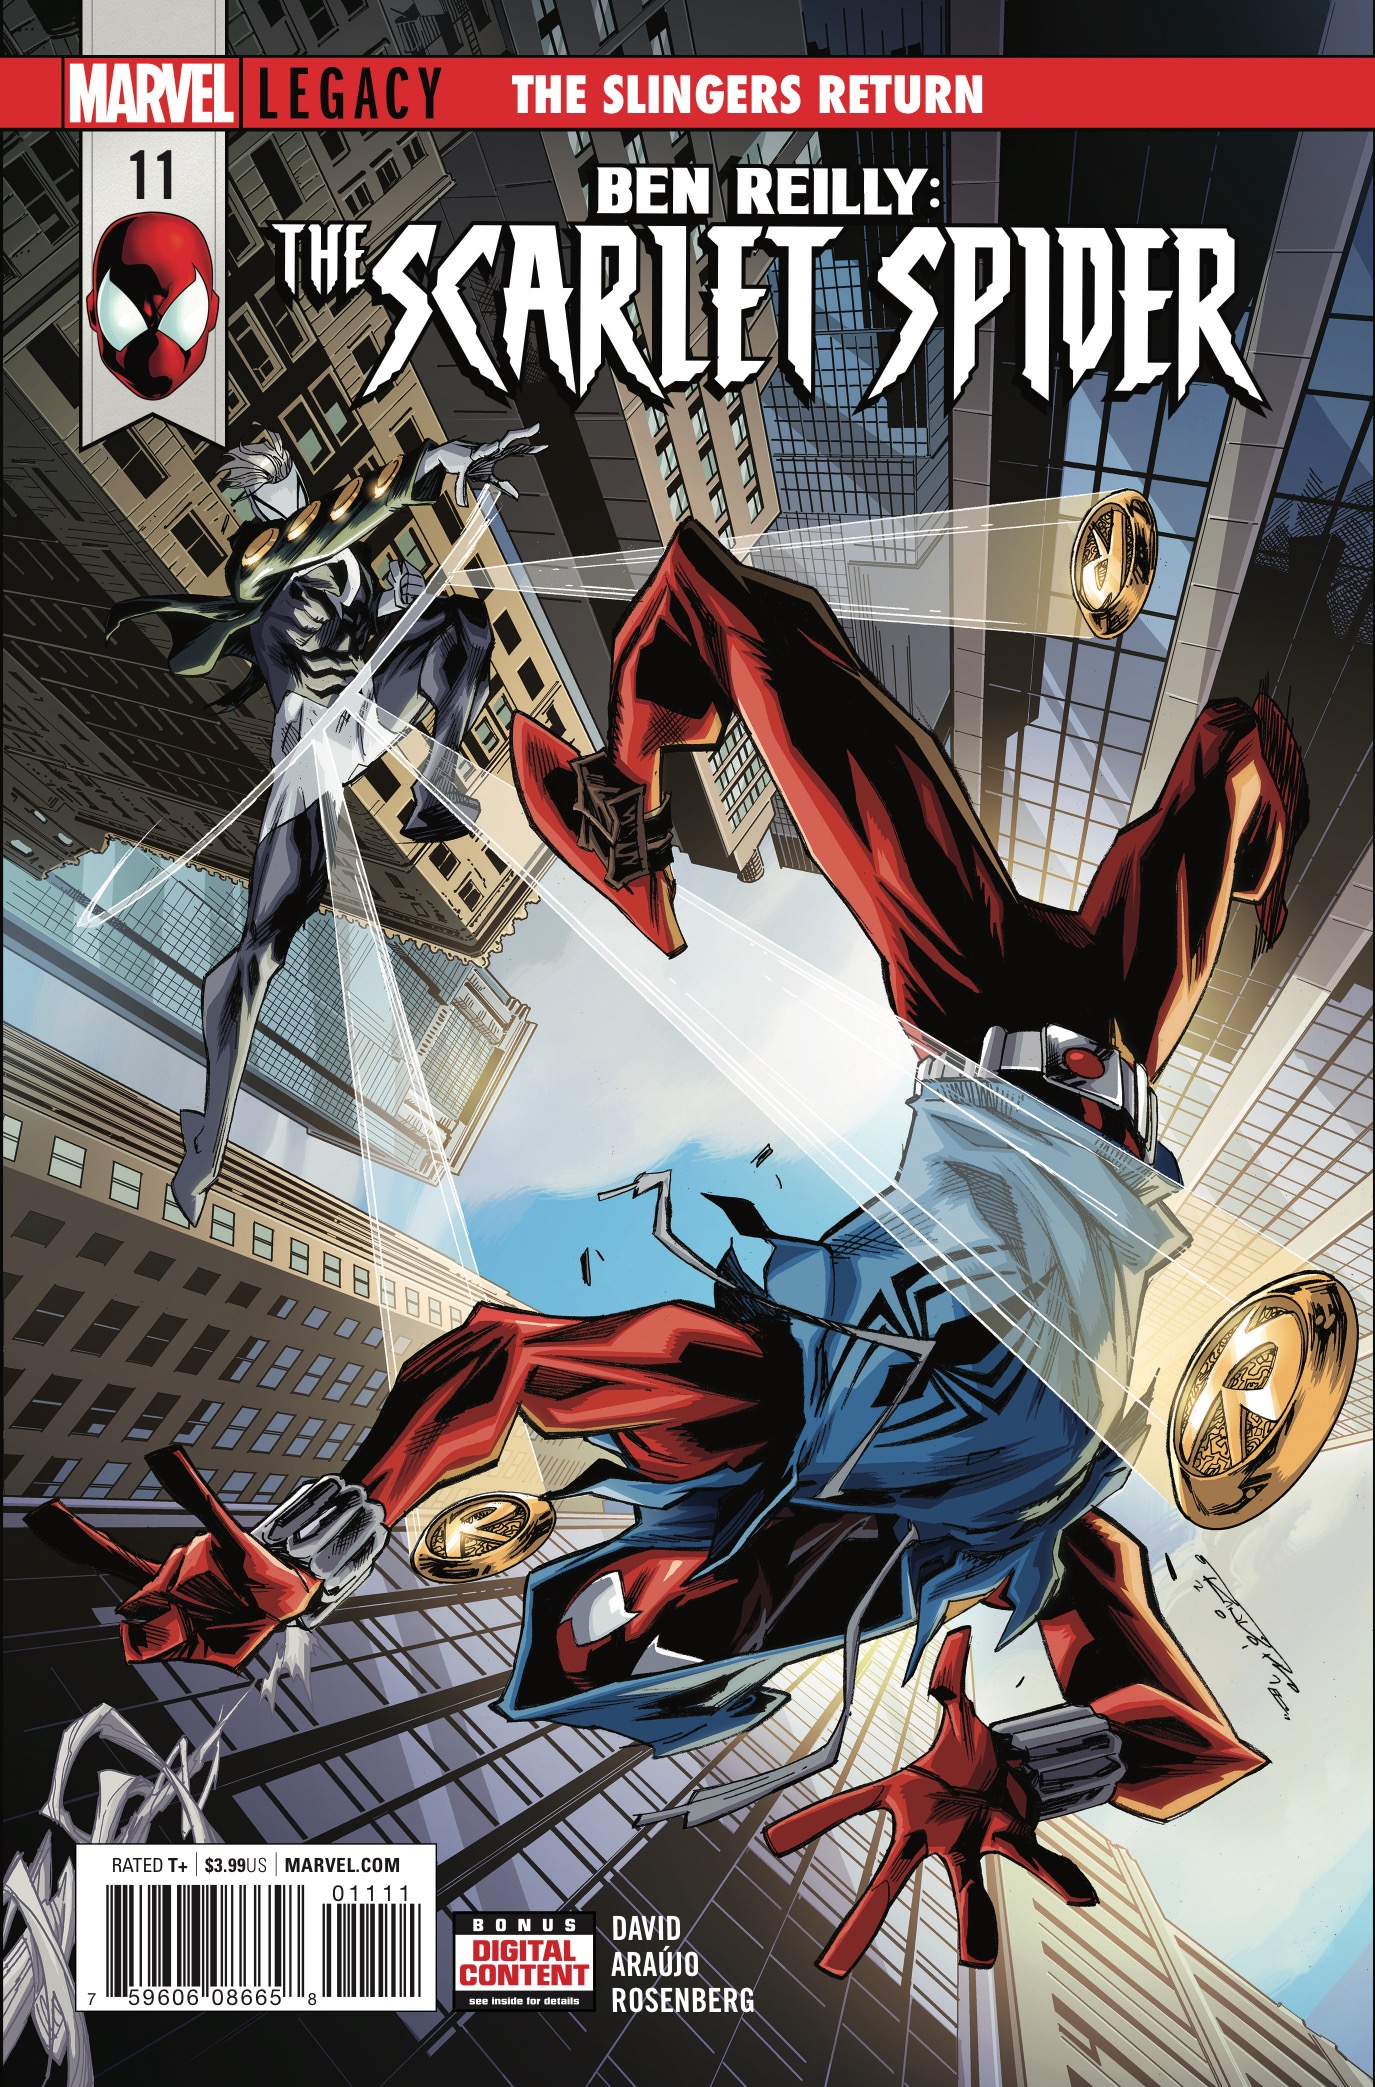 Marvel Preview: Ben Reilly: The Scarlet Spider #11